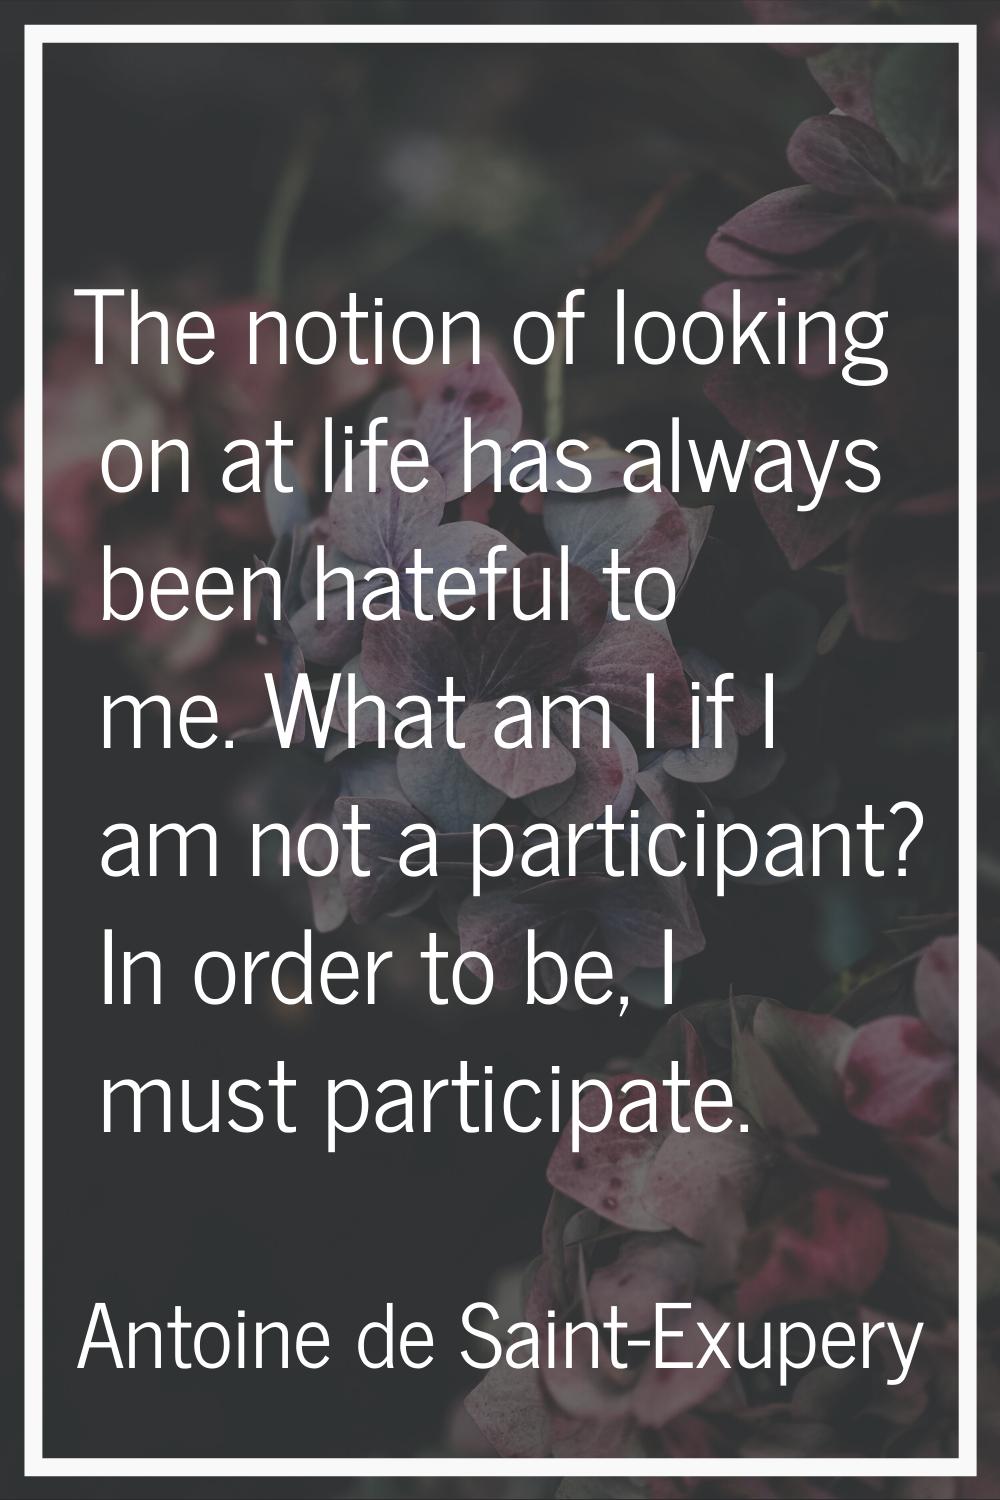 The notion of looking on at life has always been hateful to me. What am I if I am not a participant